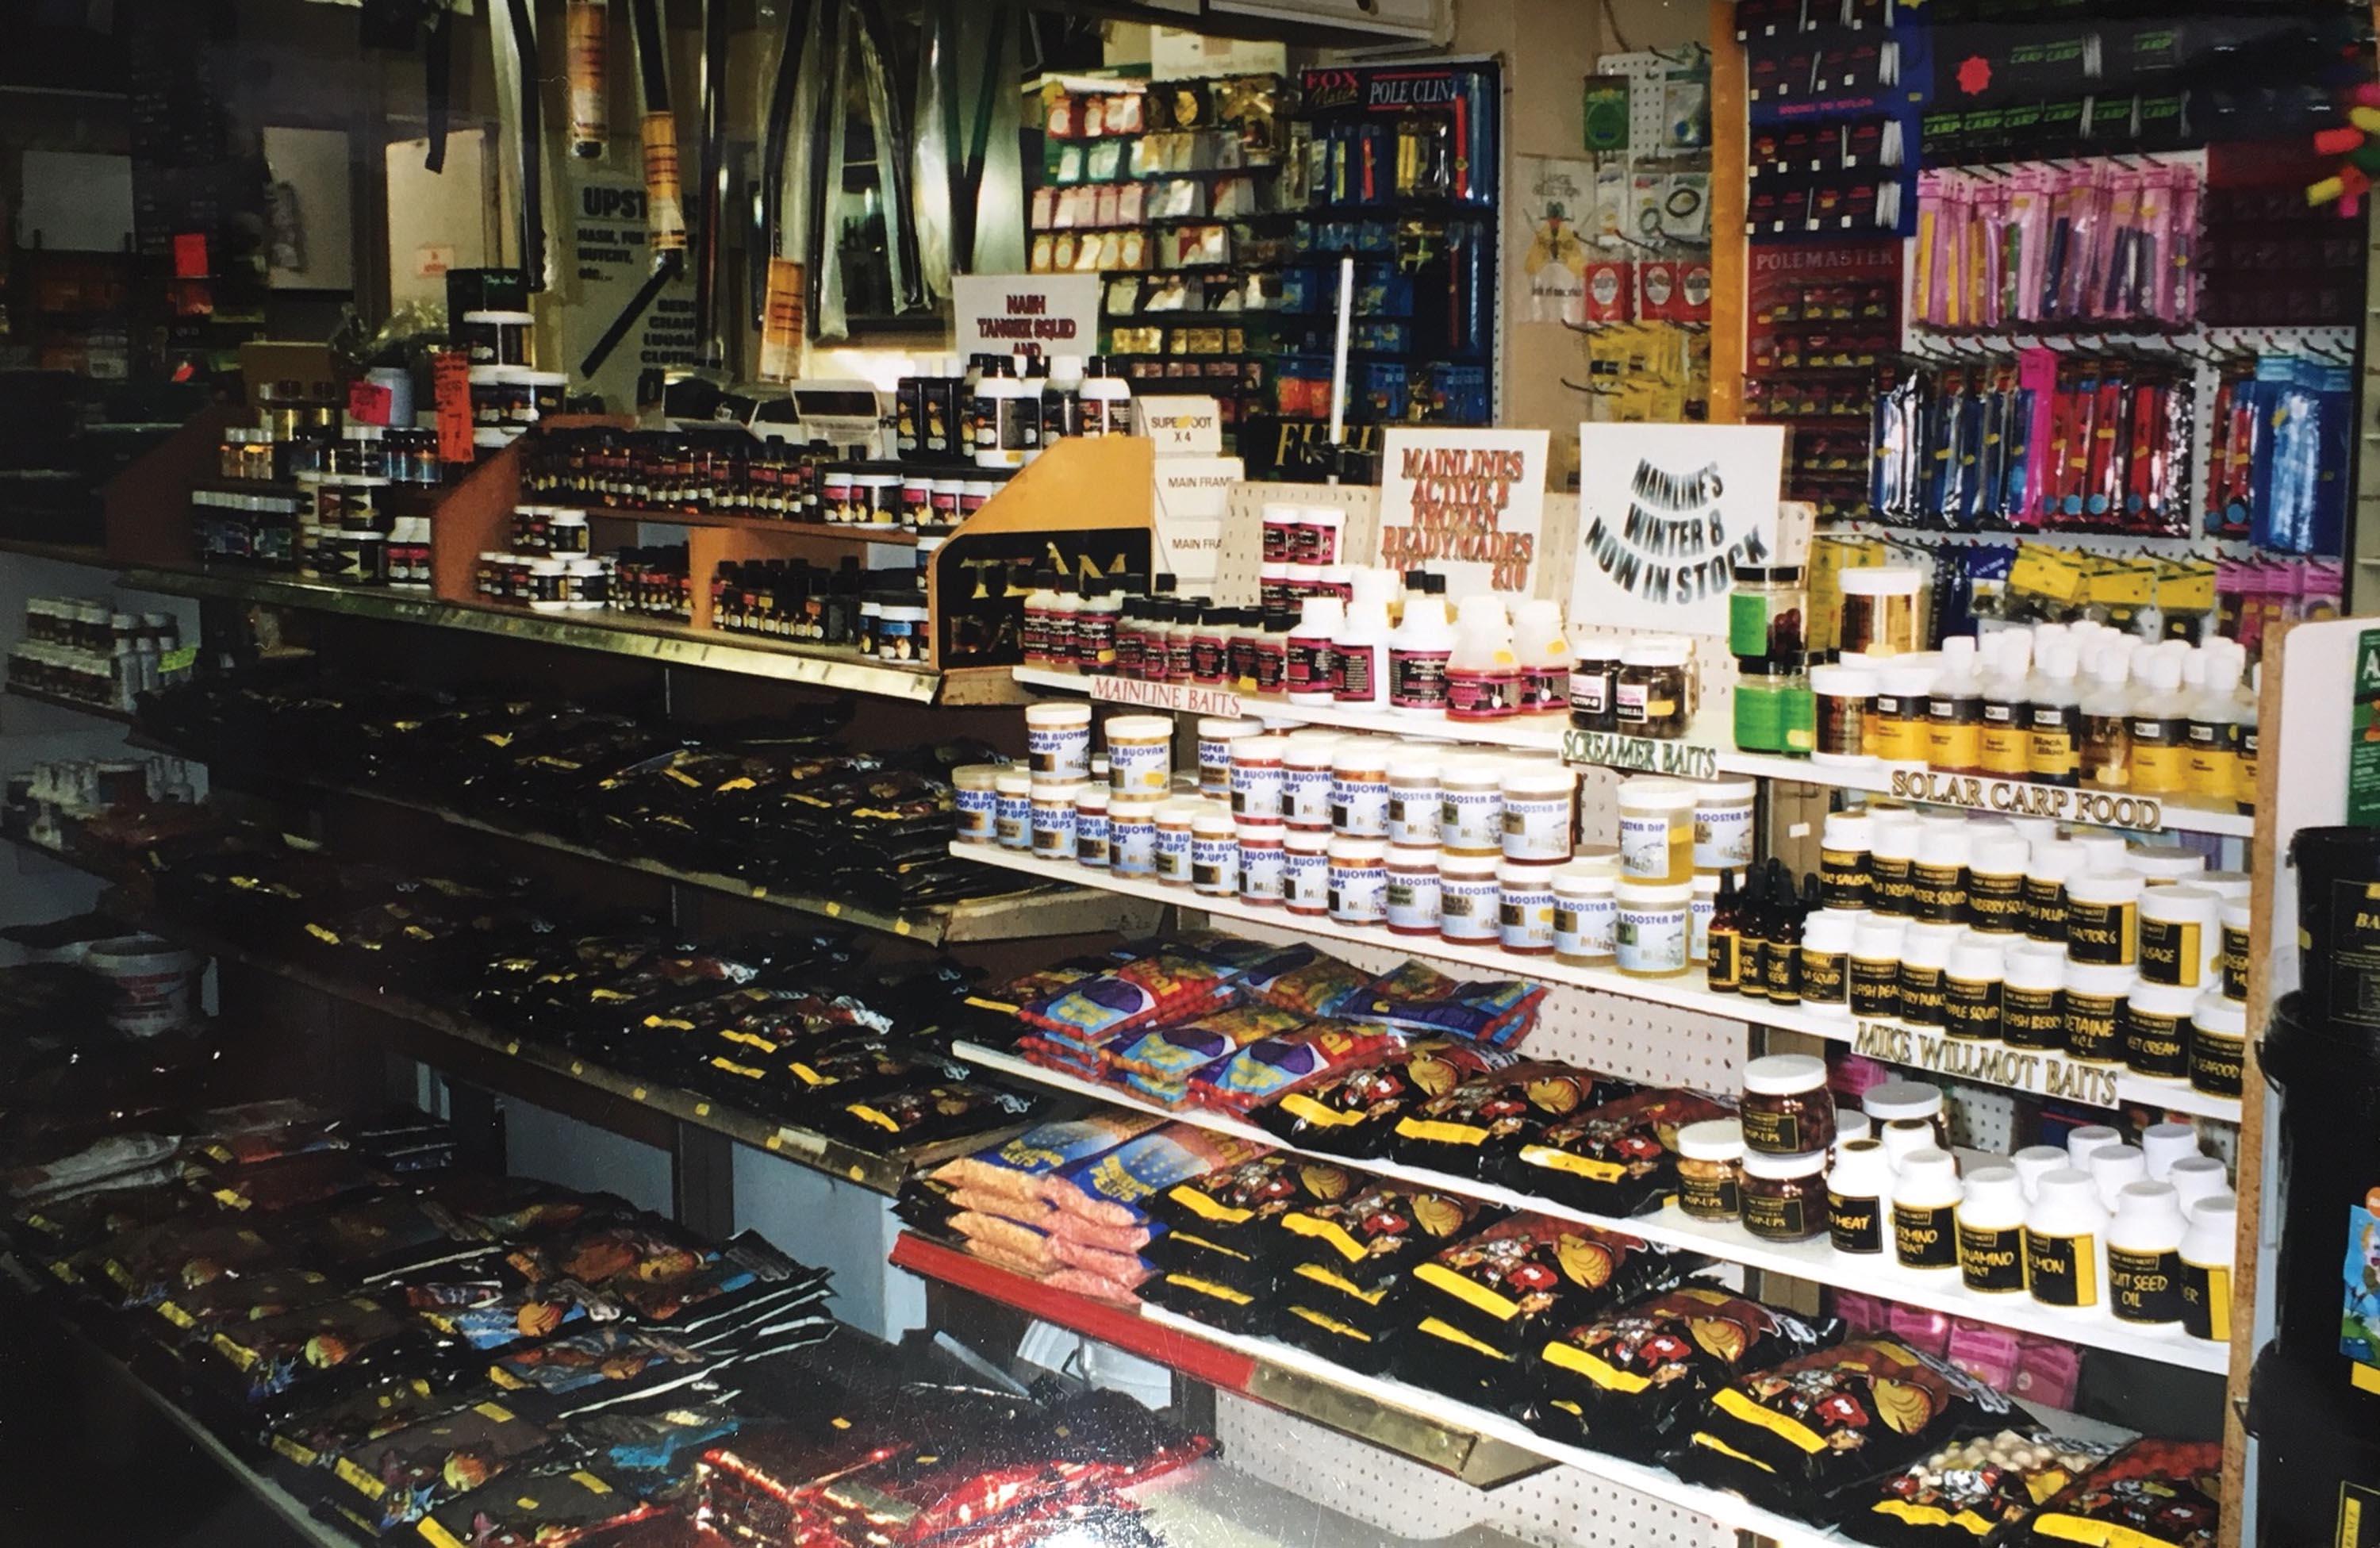 What it was like on June 16th in a tackle shop in the 90s